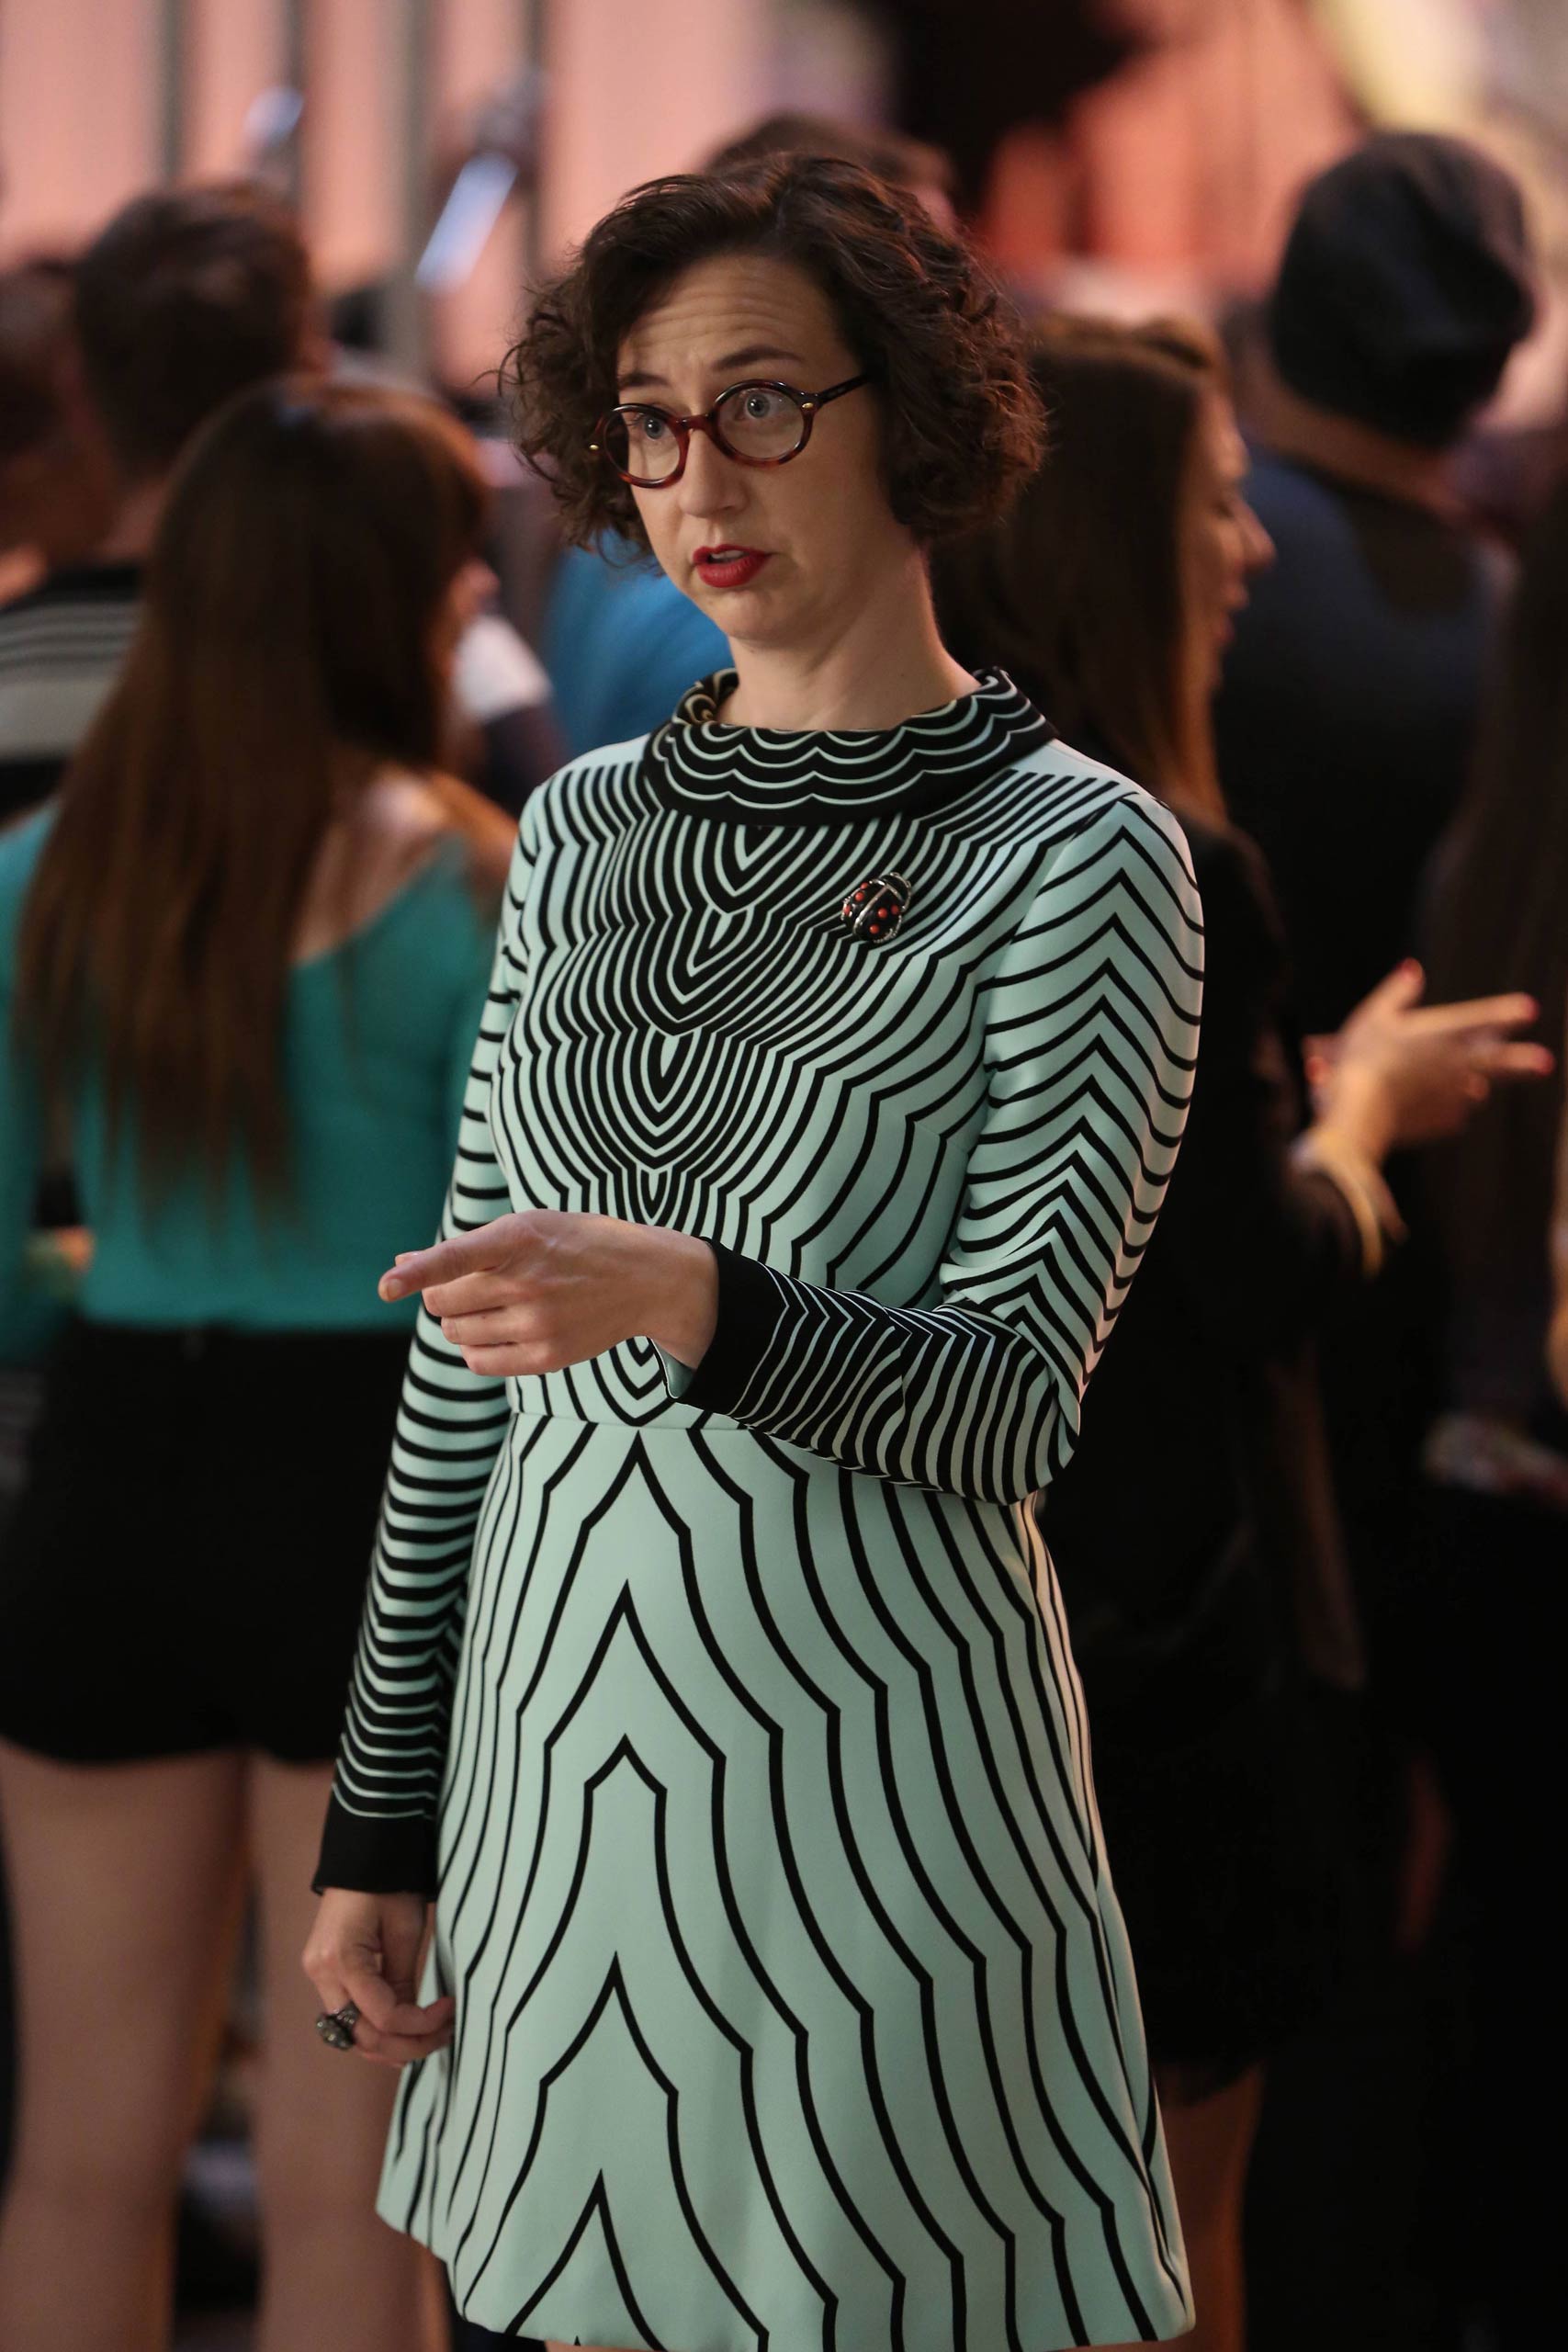 GLEE: Kristen Schaal guest-stars as a famous television writer in the "The Untitled Rachel Berry Project" season finale episode of GLEE airing Tuesday, May 14 (8:00-9:00 PM ET/PT) on FOX. ©2014 Fox Broadcasting Co. CR: Mike Yarish/FOX